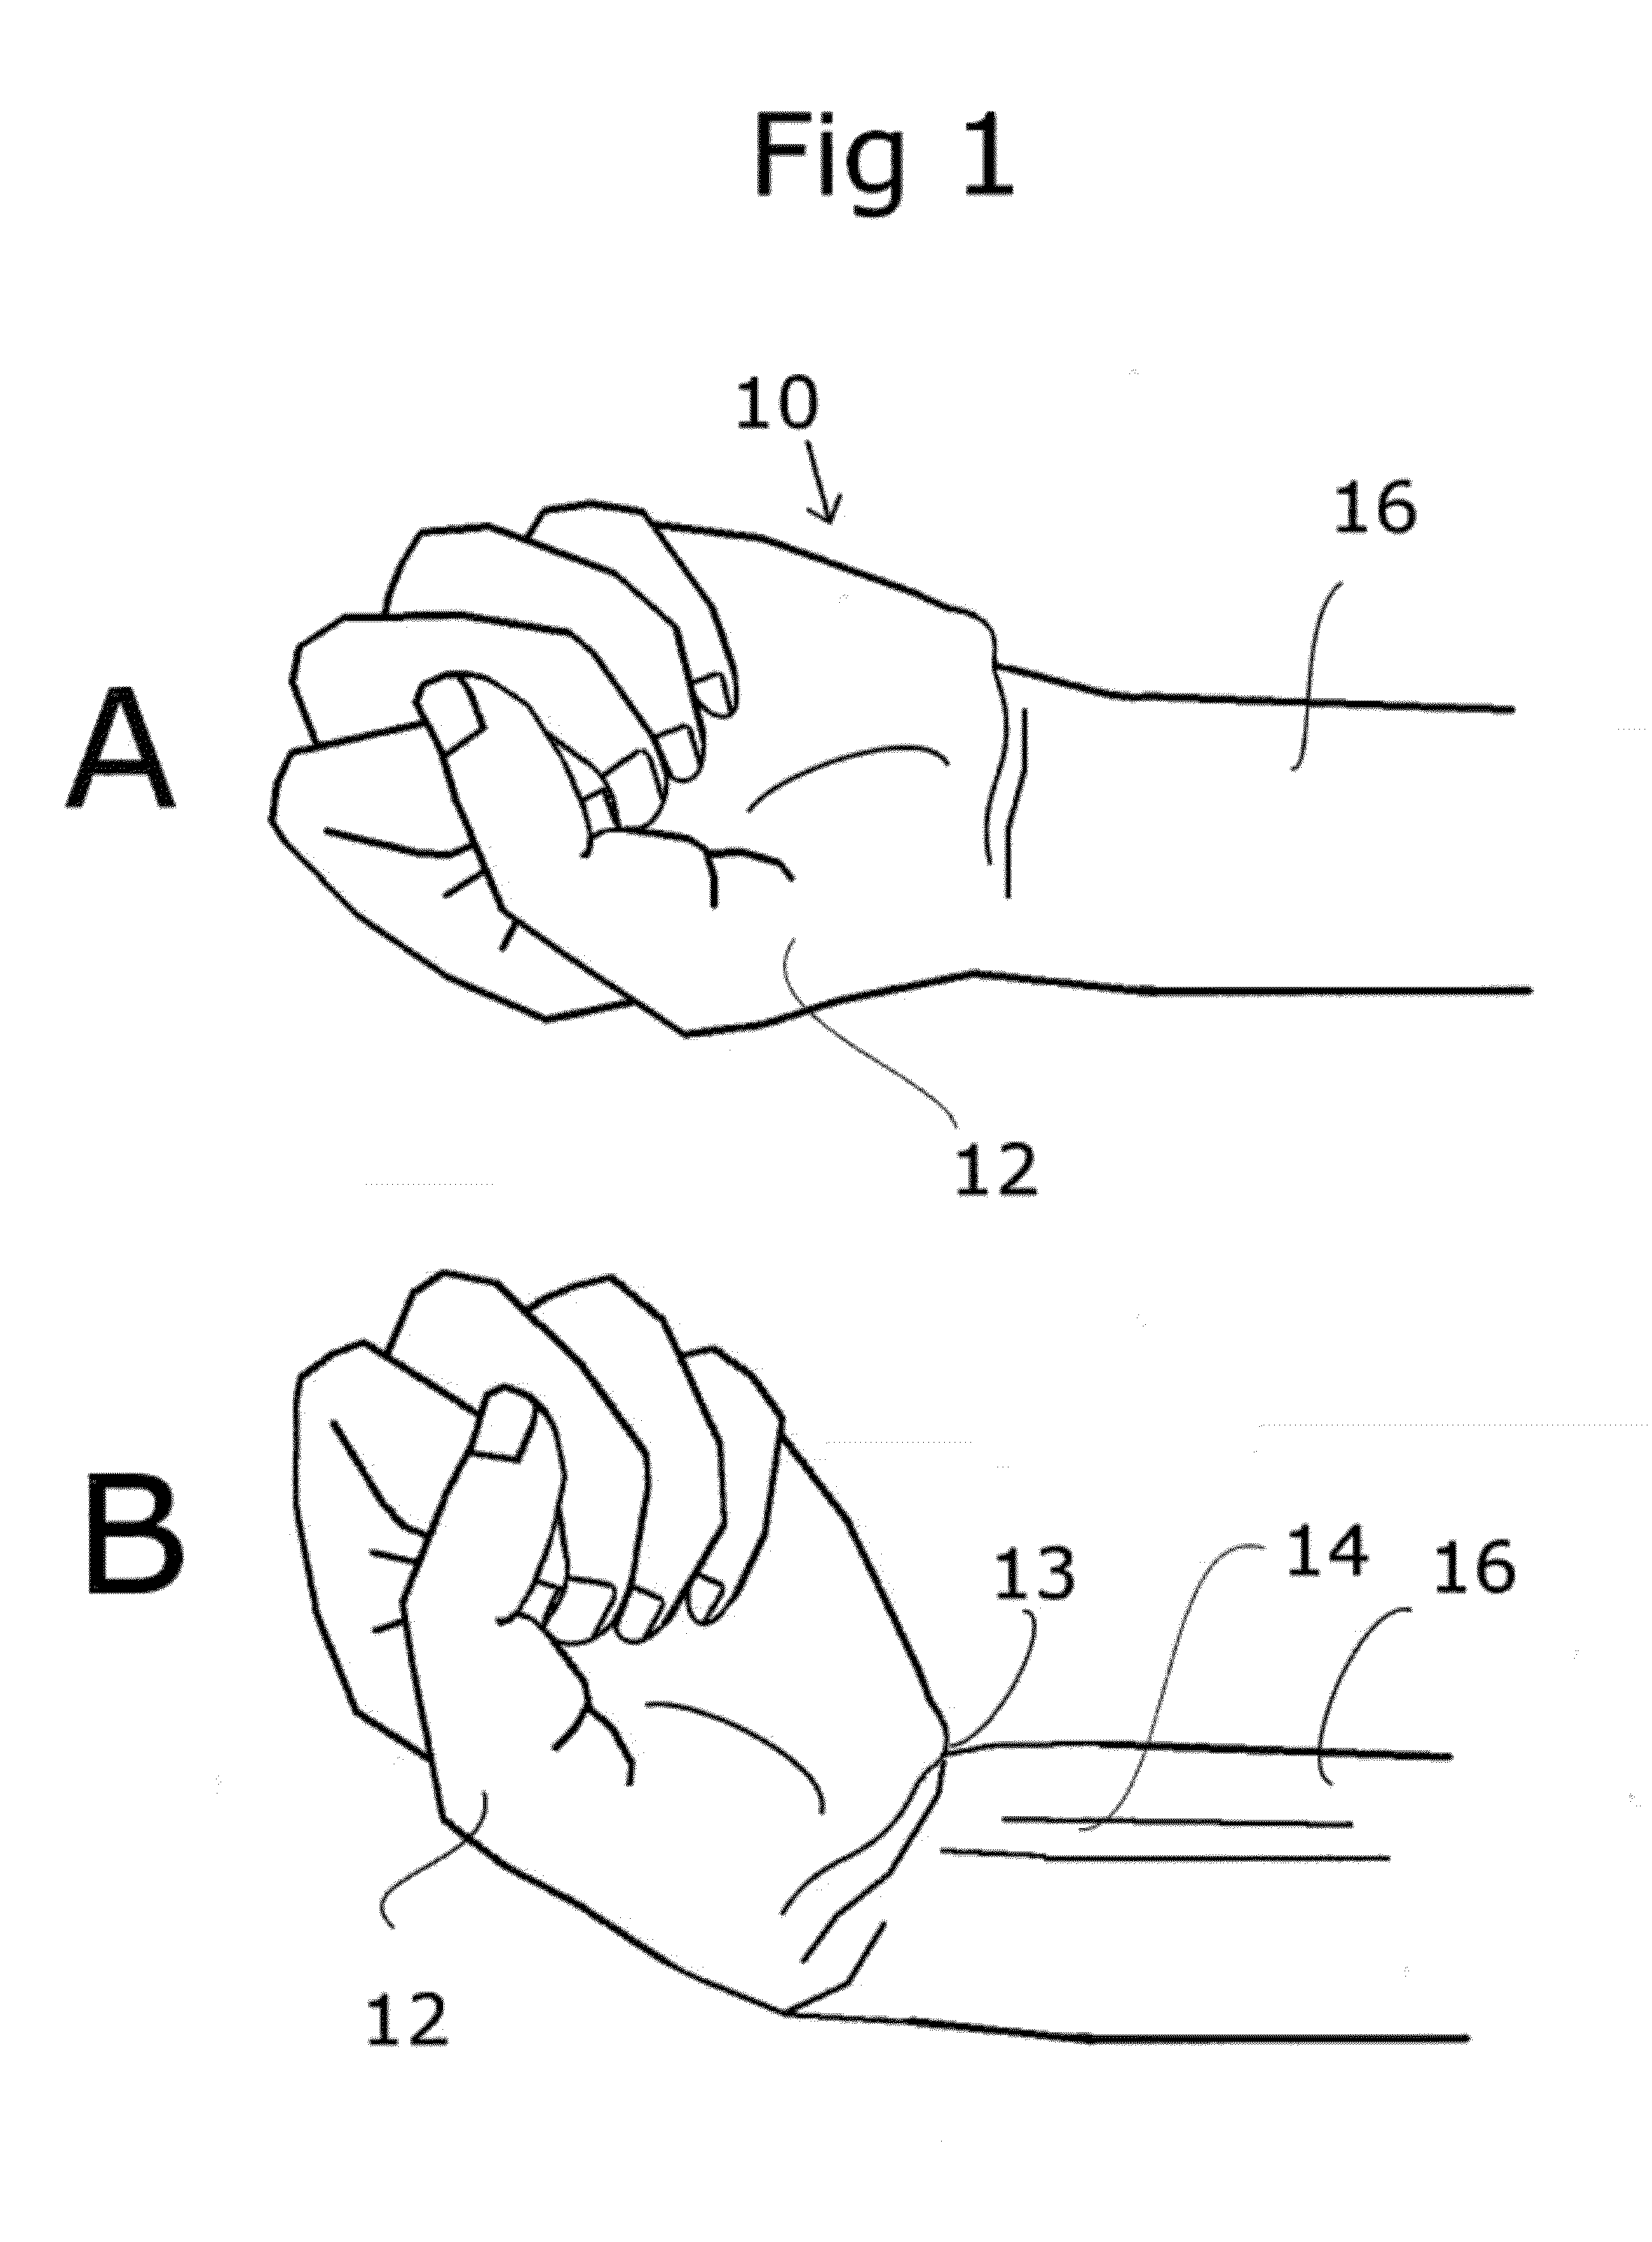 Method and device to alleviate carpal tunnel syndrome and dysfunctions of other soft tissues